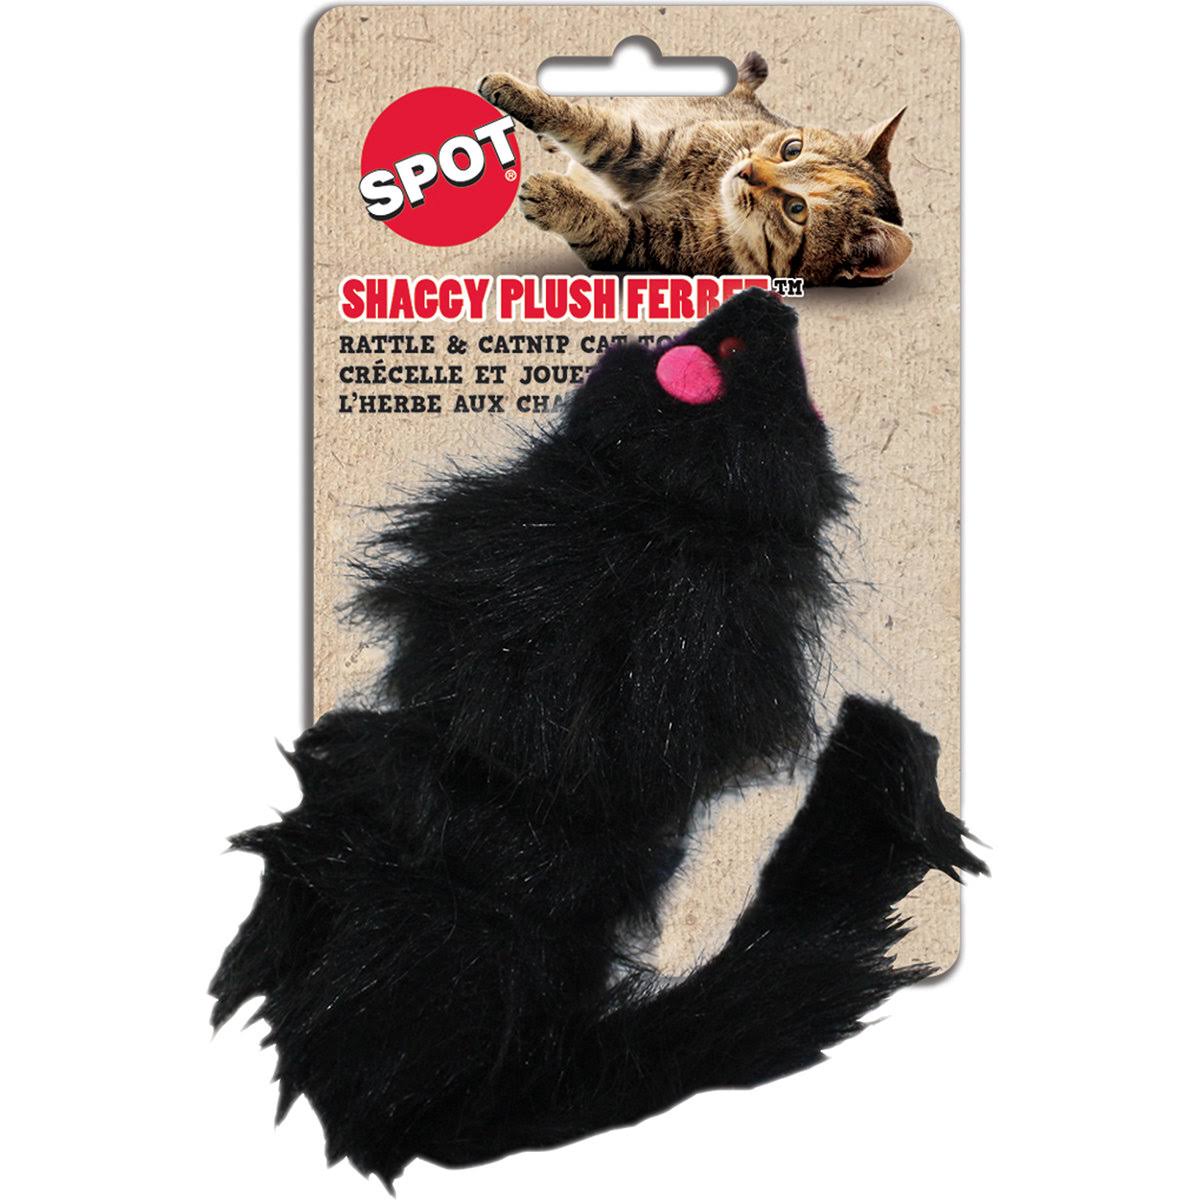 Ethical Shaggy Plush Ferret Cat Toy - with Rattle and Catnip